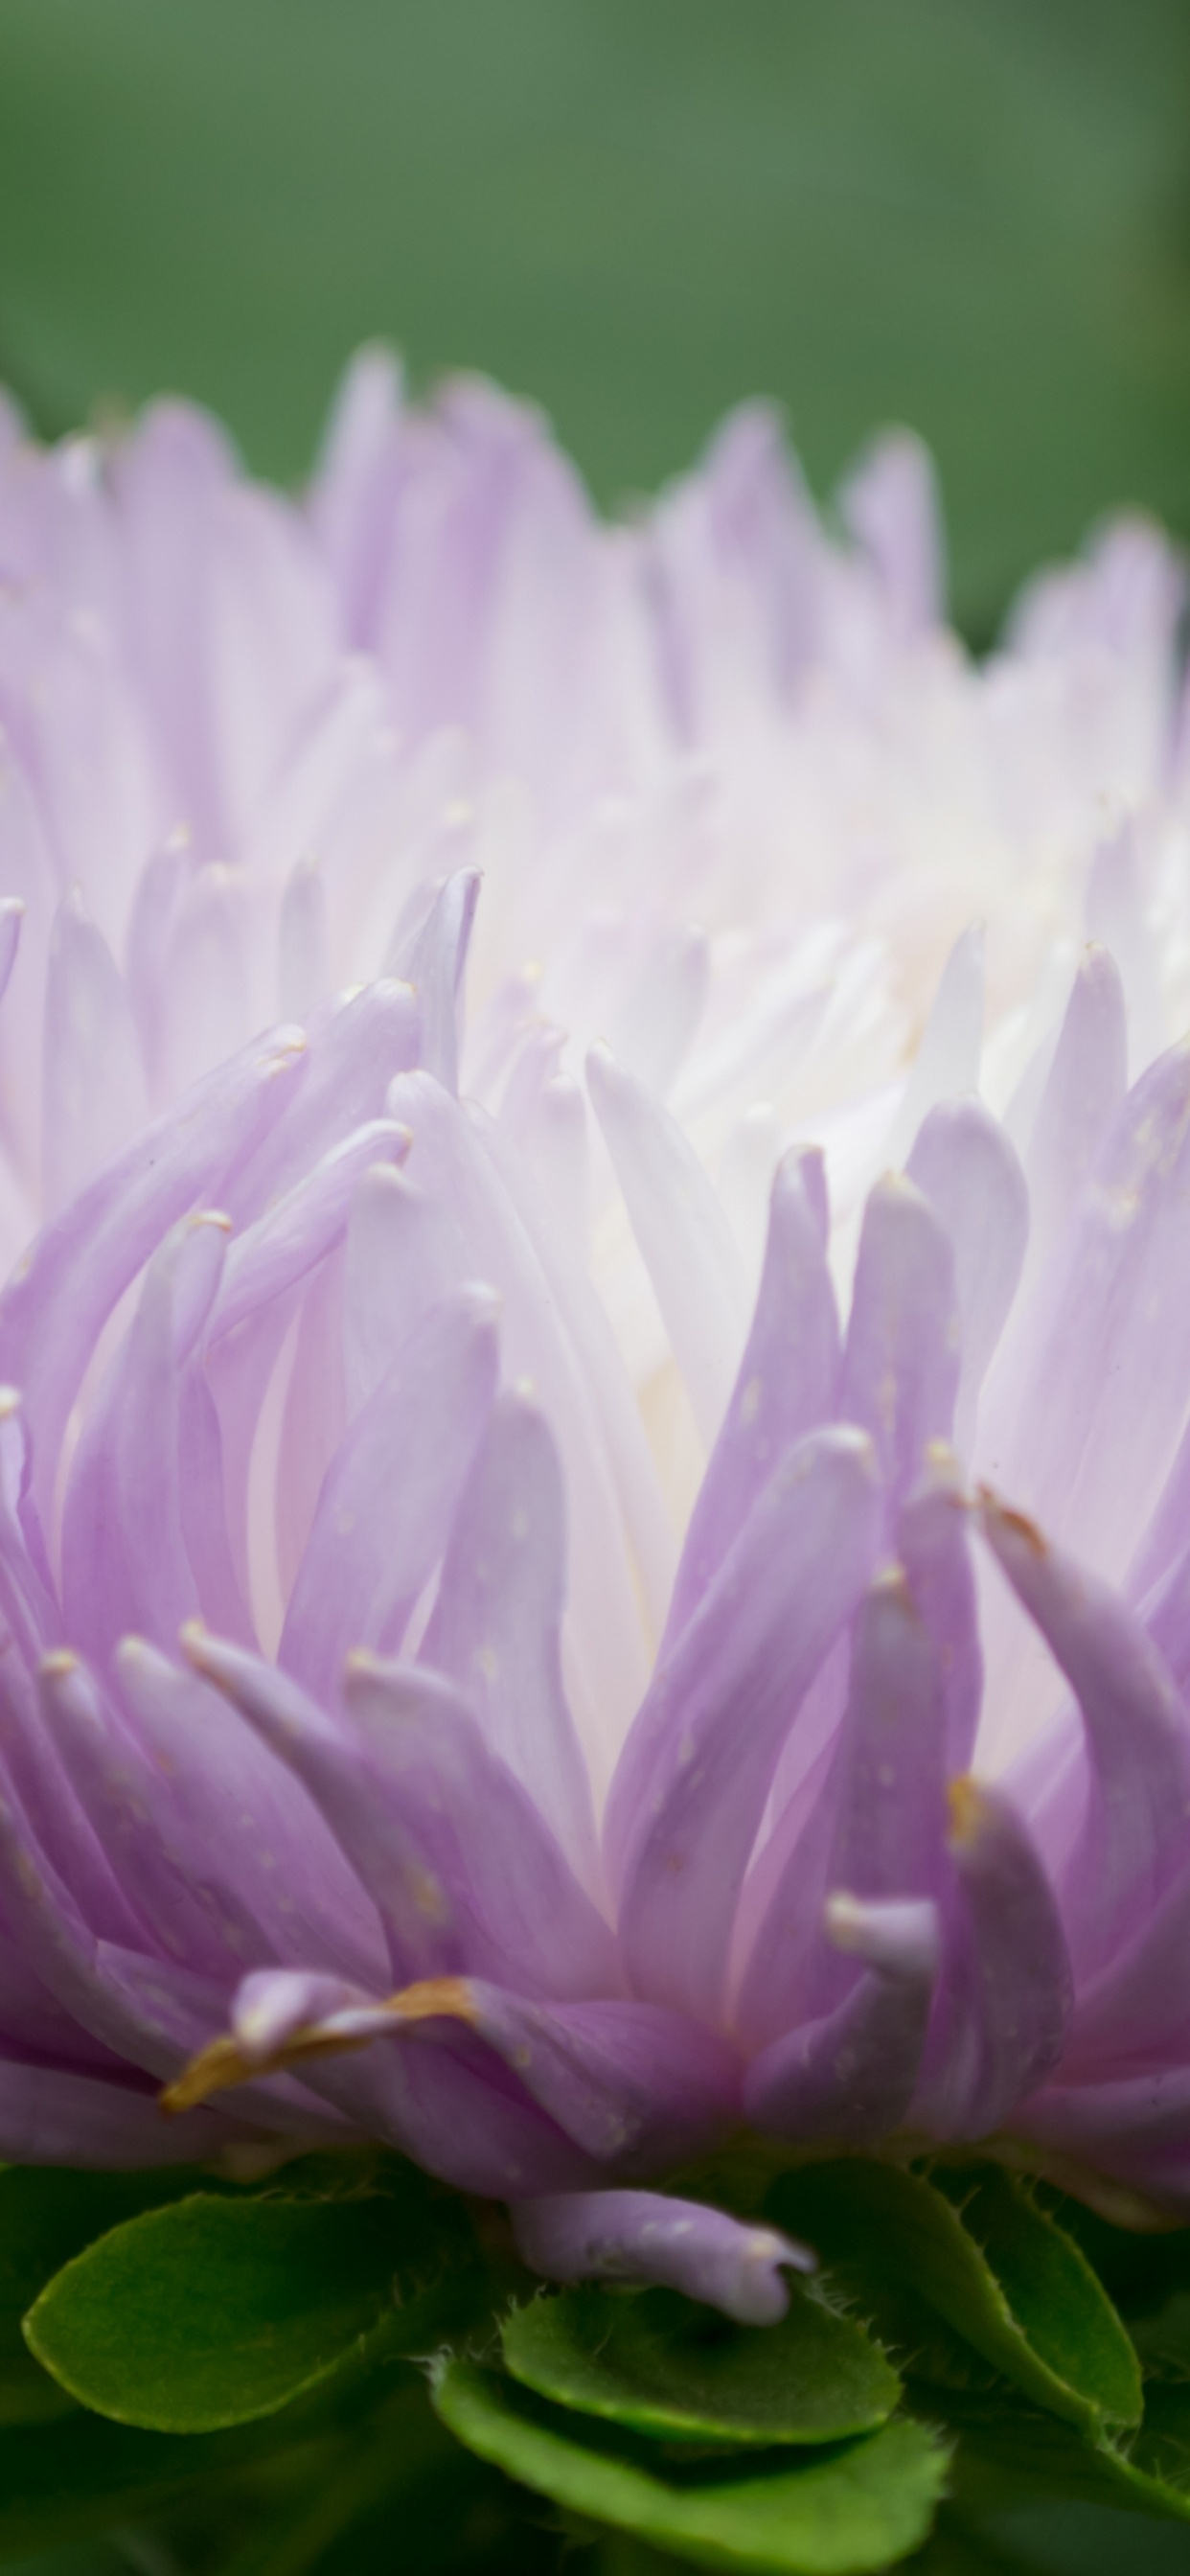 White and Purple Flower in Macro Shot. Wallpaper in 1242x2688 Resolution